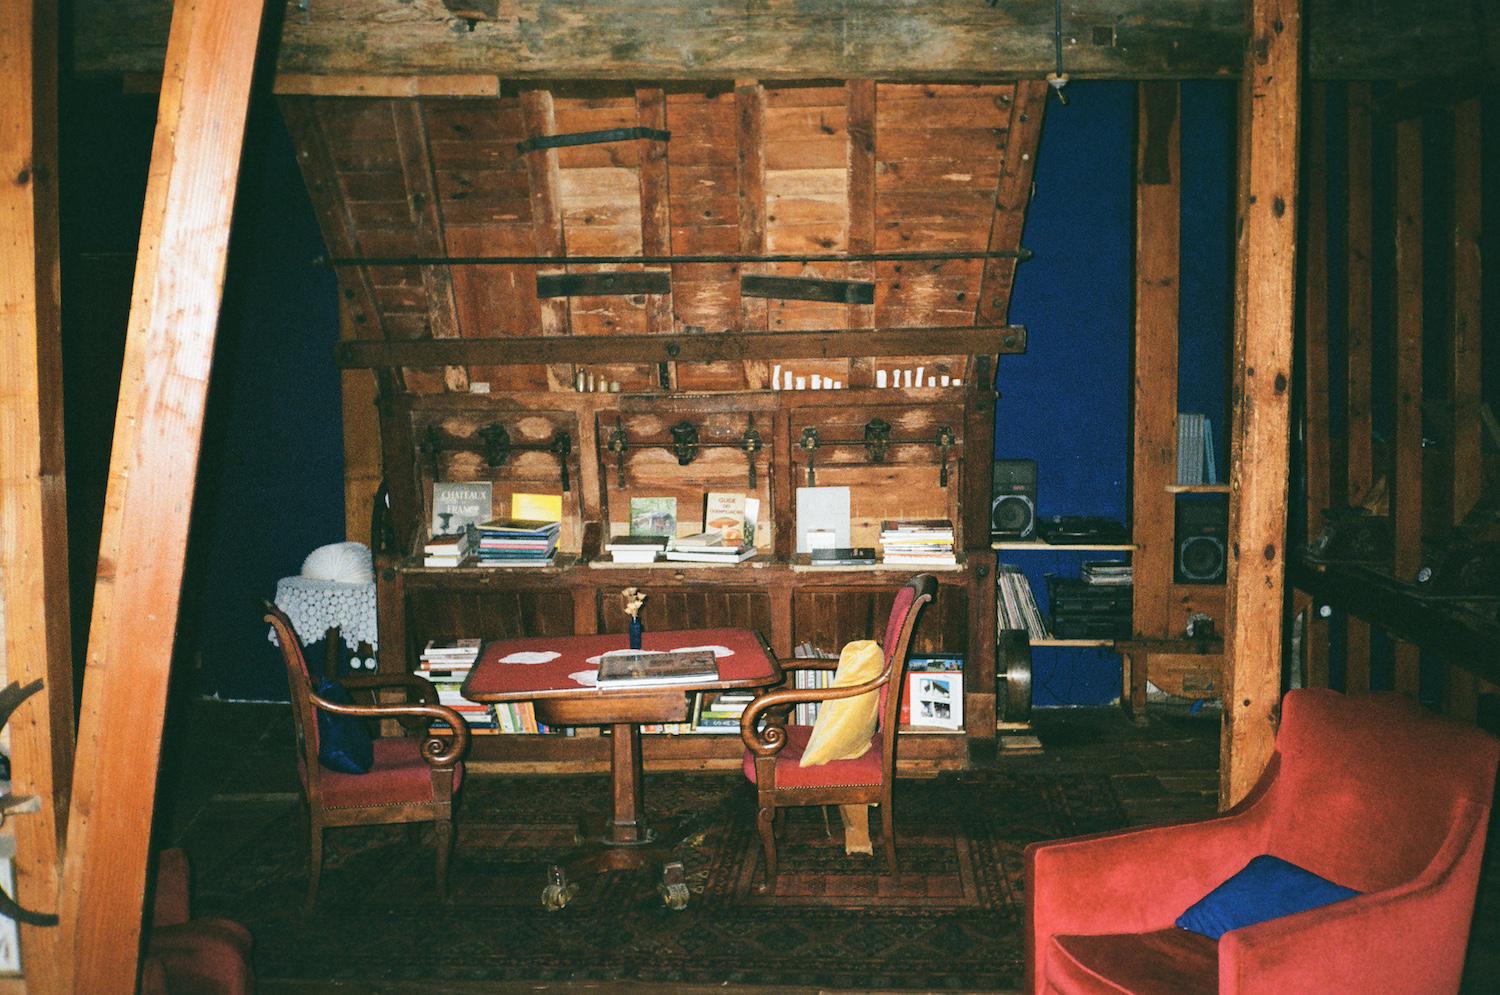 a wooden chute in a room with blue walls, with books and vinyls on shelves in front and to the side of the chute feature which originates from the building being an old mill